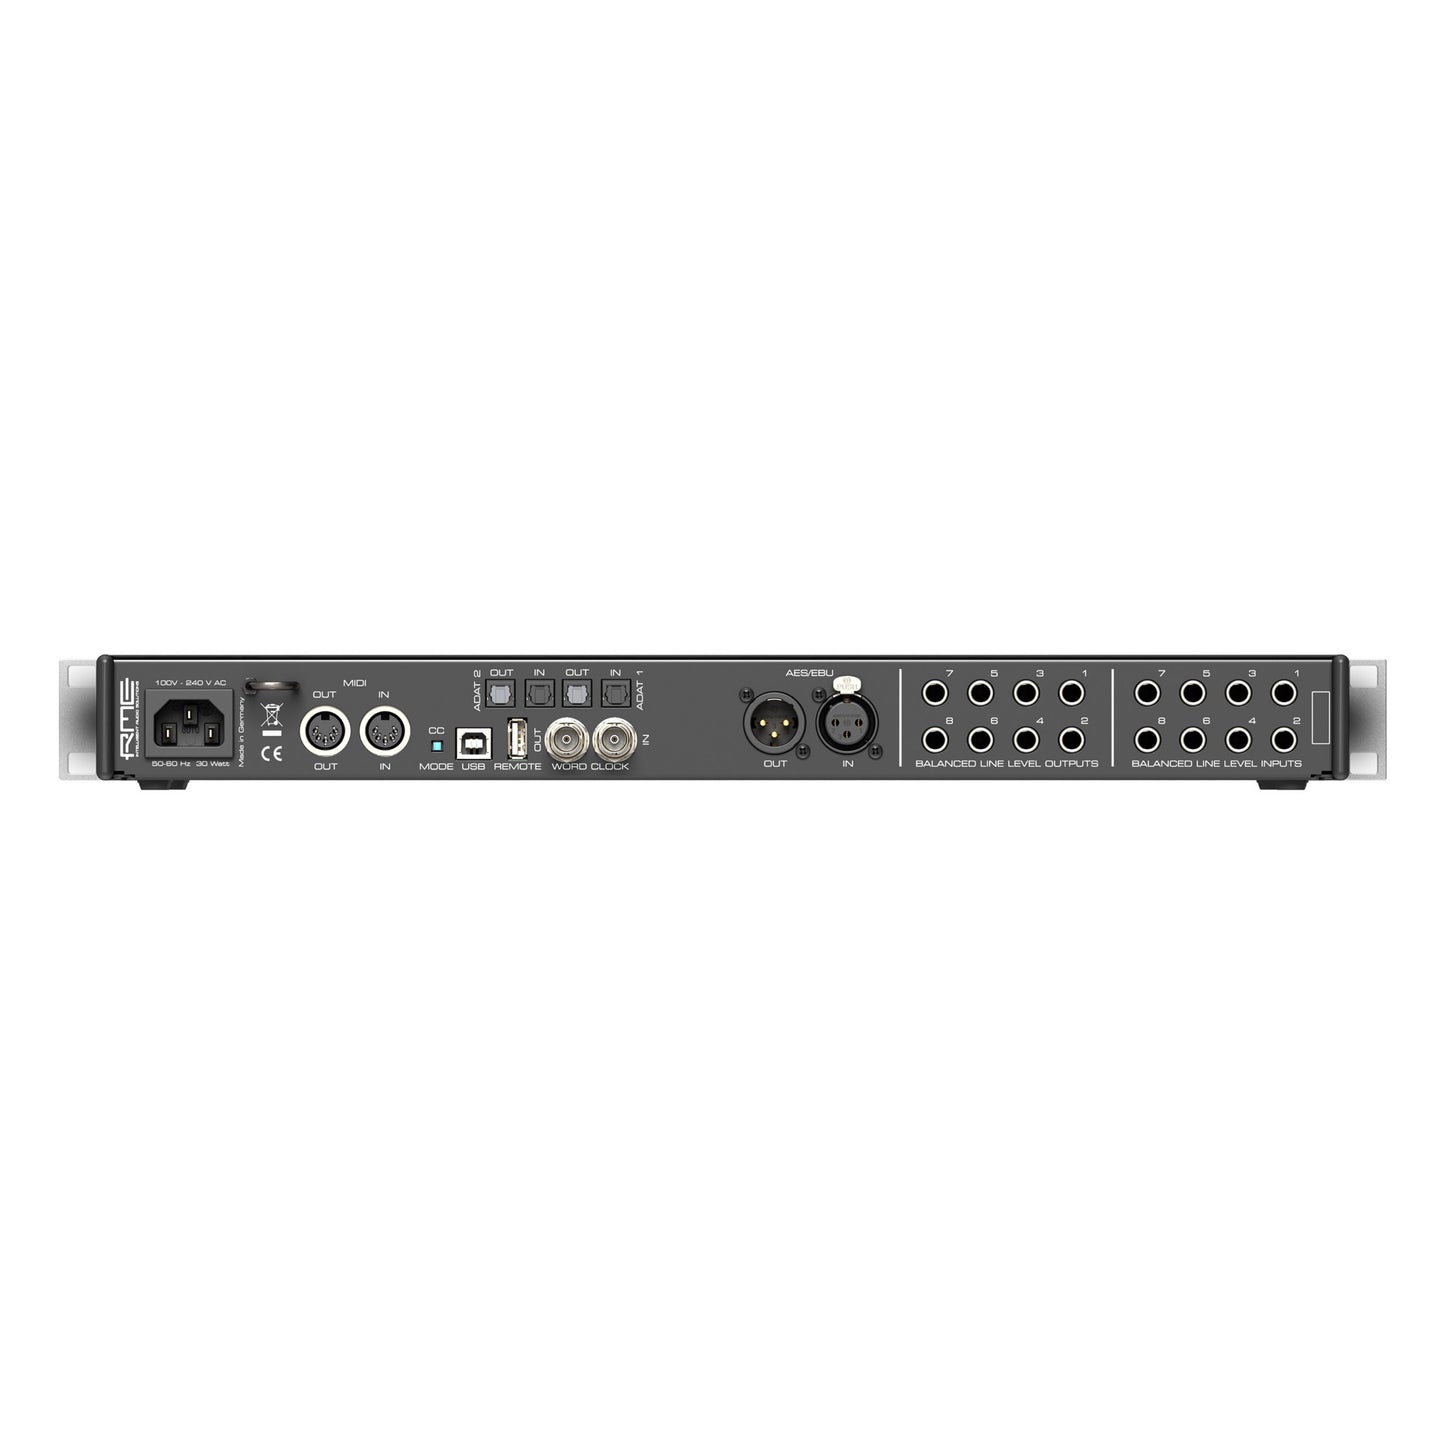 RME Fireface 802 FS 60 Channel 192khz High-End USB Audio Interface